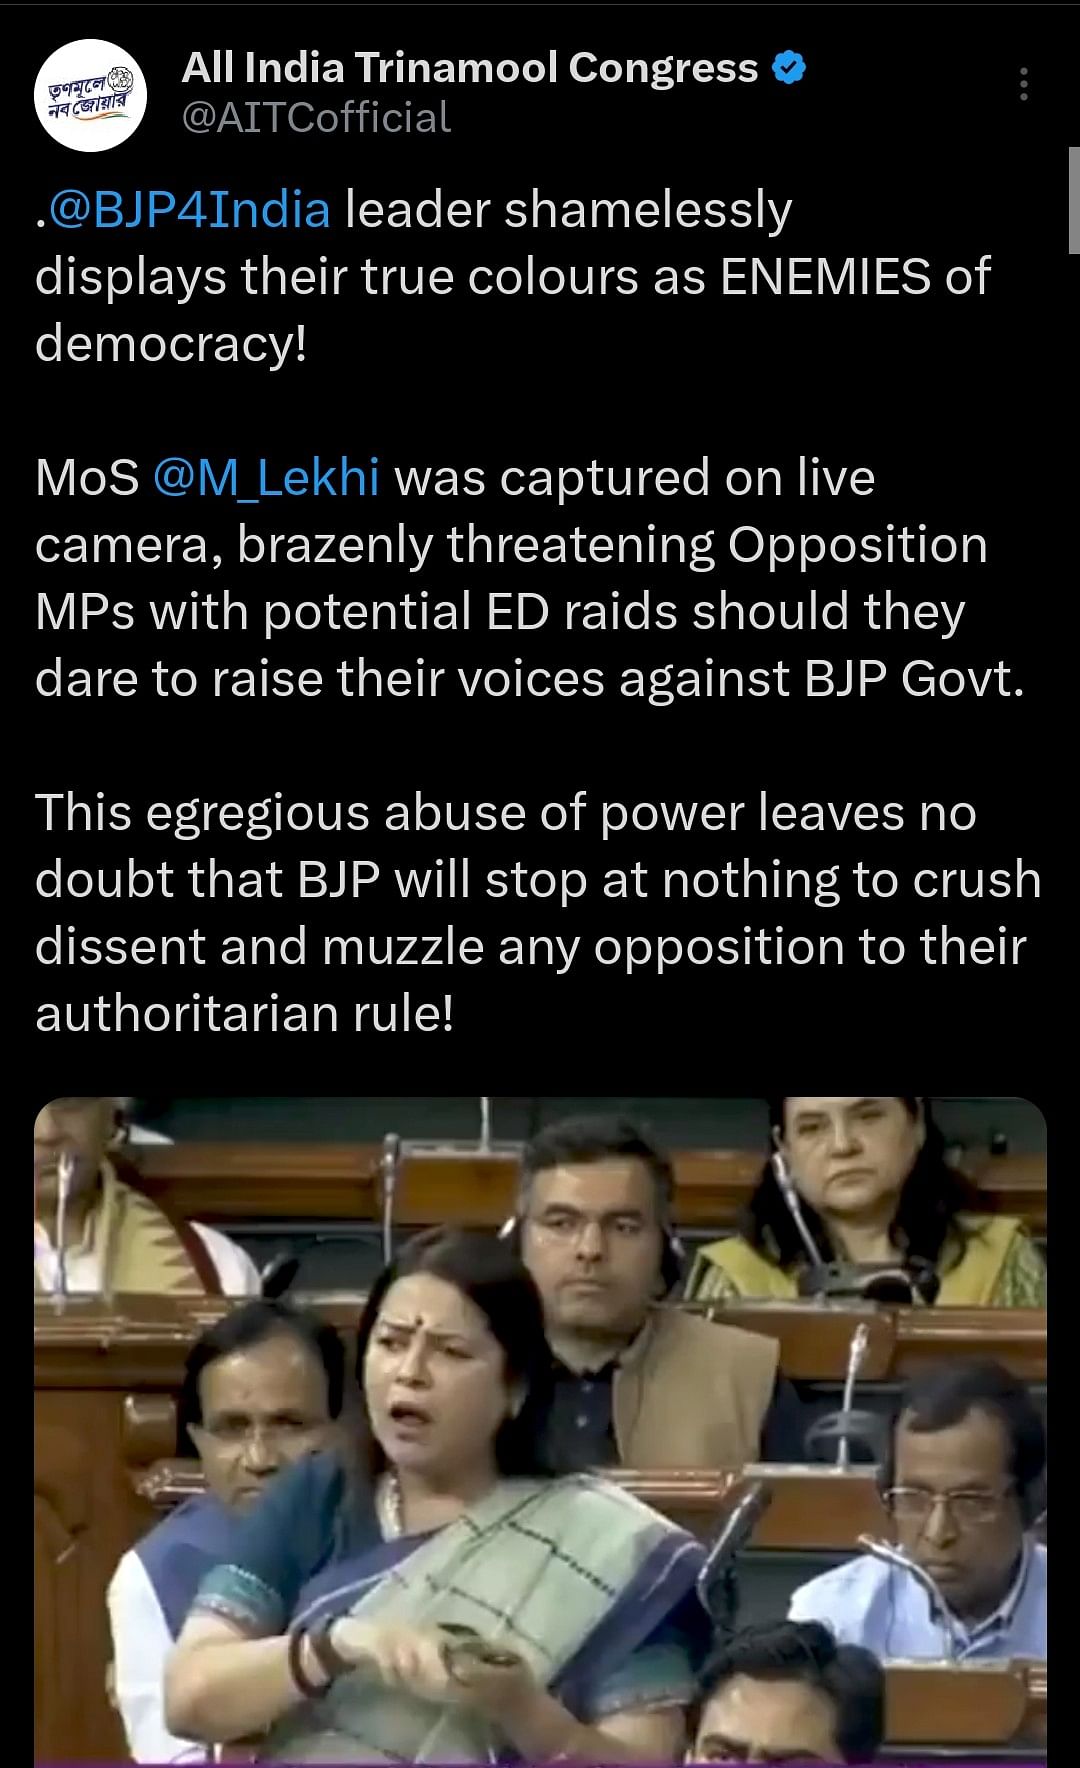 Opposition parties claimed that Meenakshi Lekhi's statement was an 'admission that Modi government misuses the ED'.